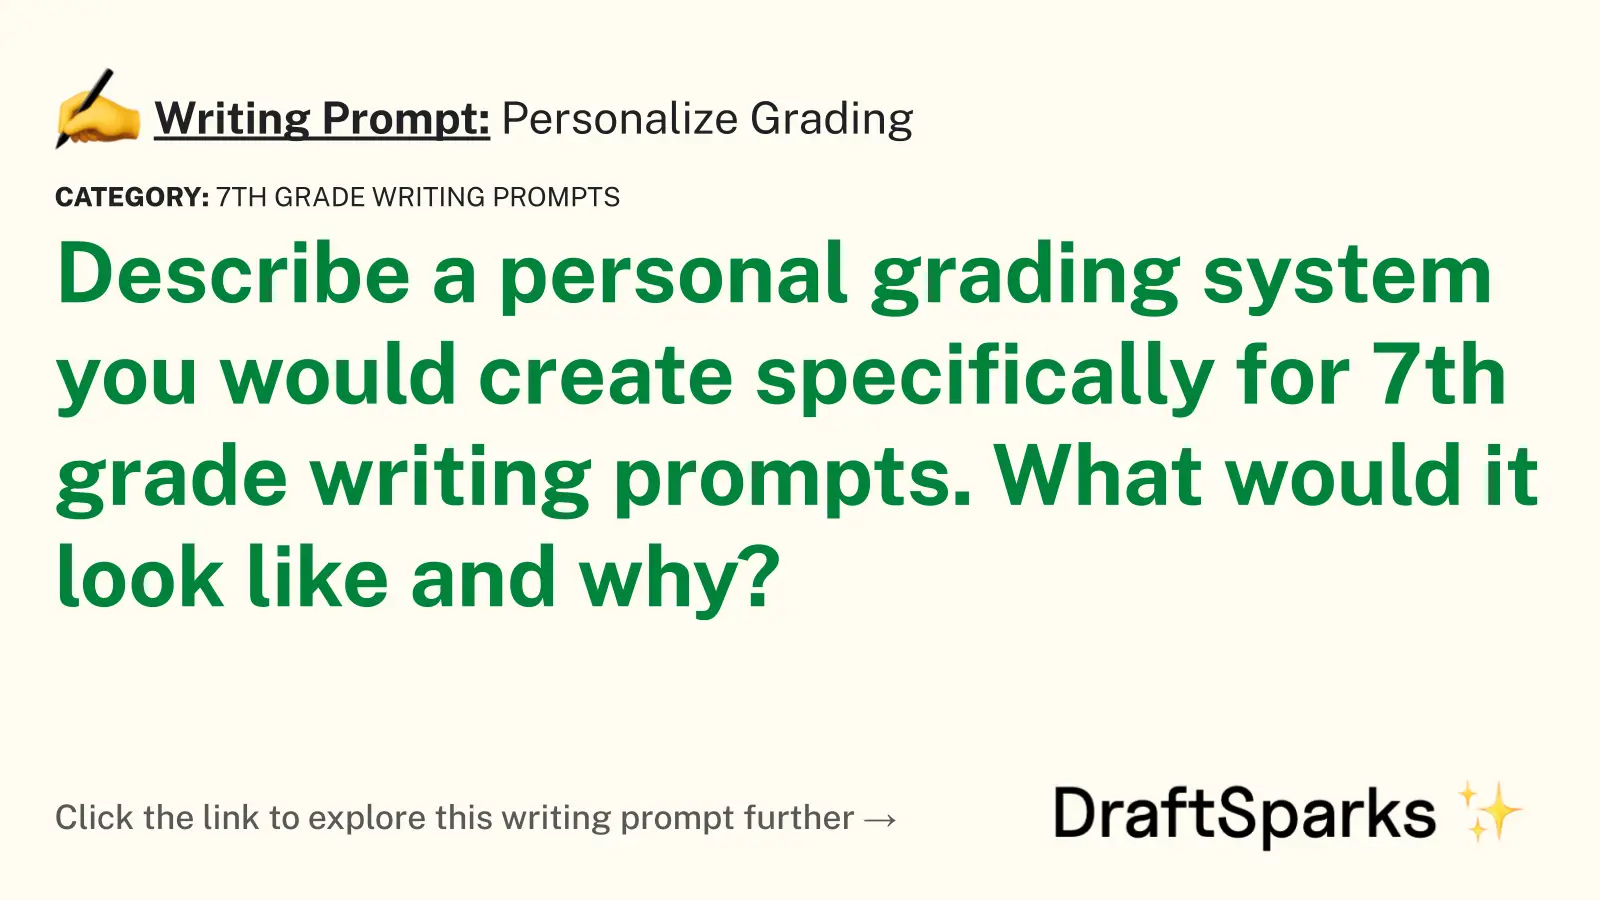 Personalize Grading